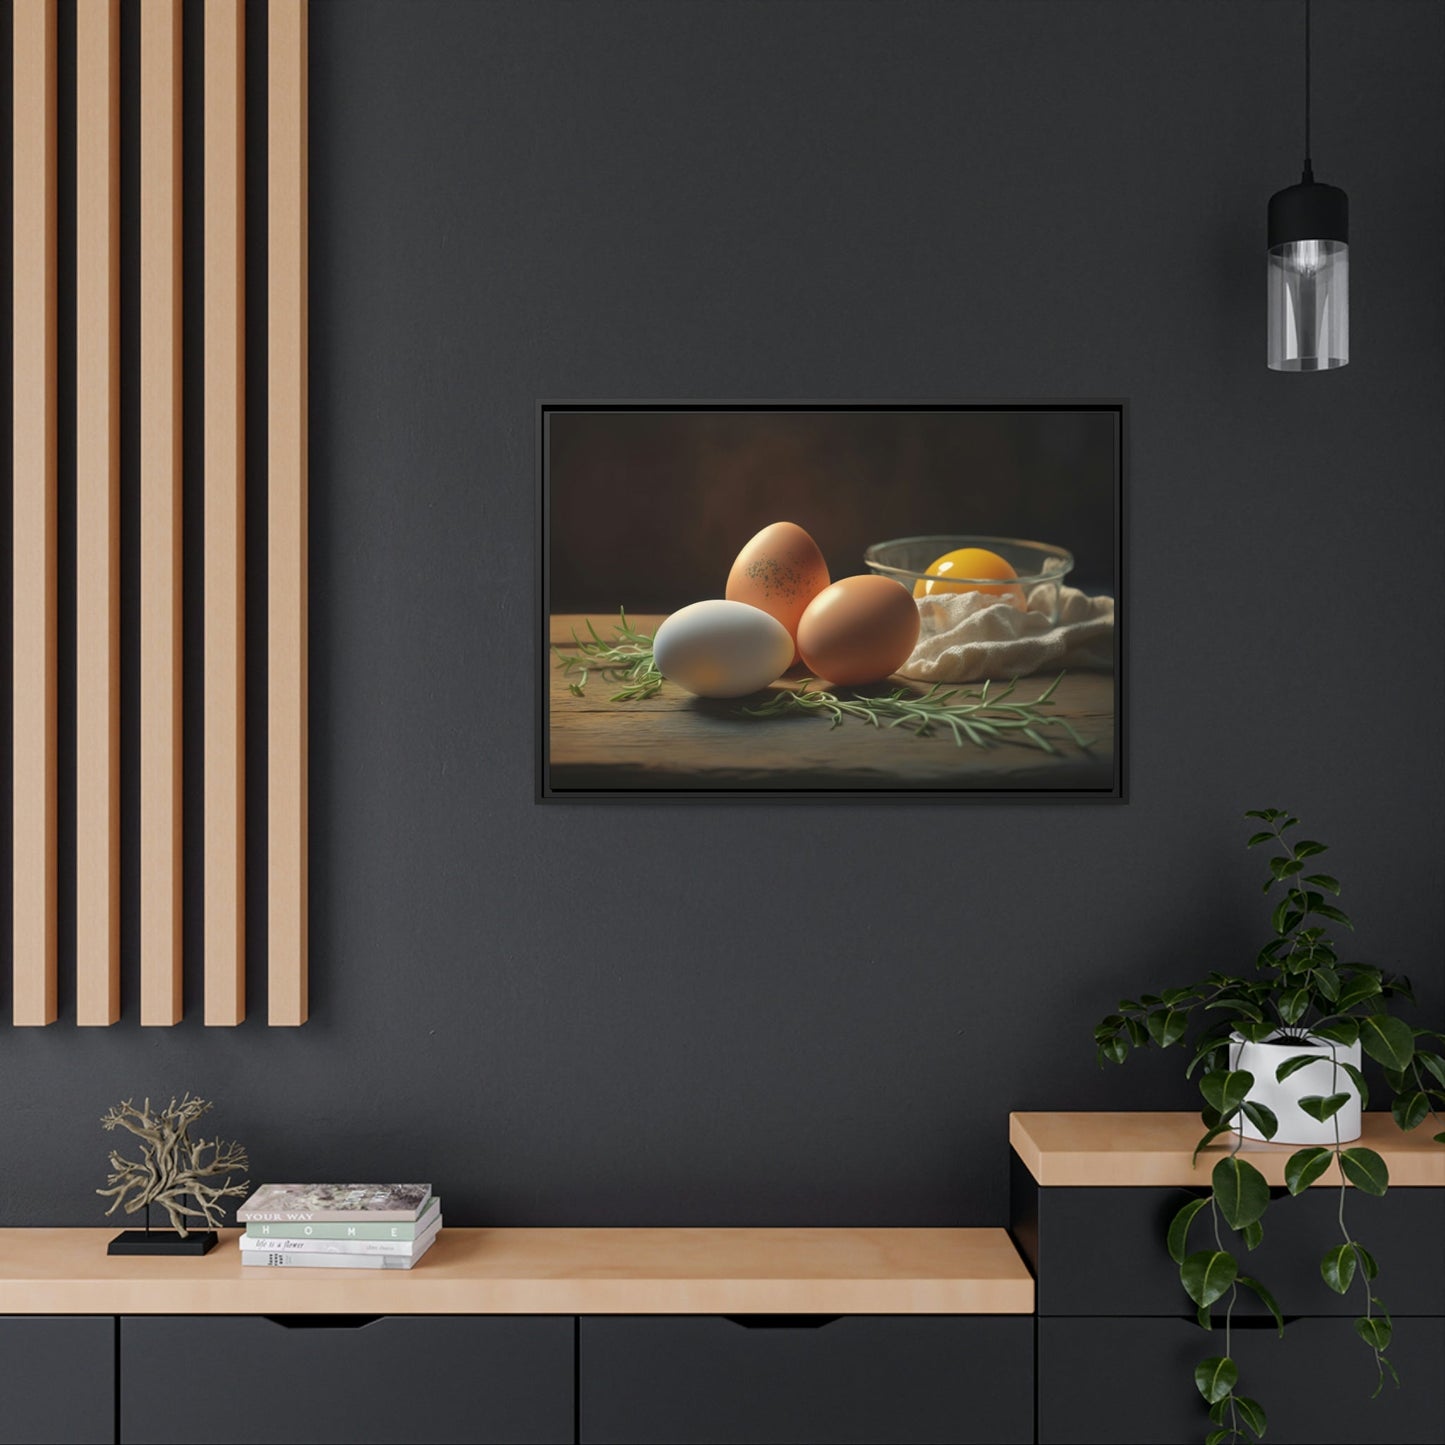 Eggstract Shapes: A Contemporary Painting of Geometric Forms Featuring Eggs